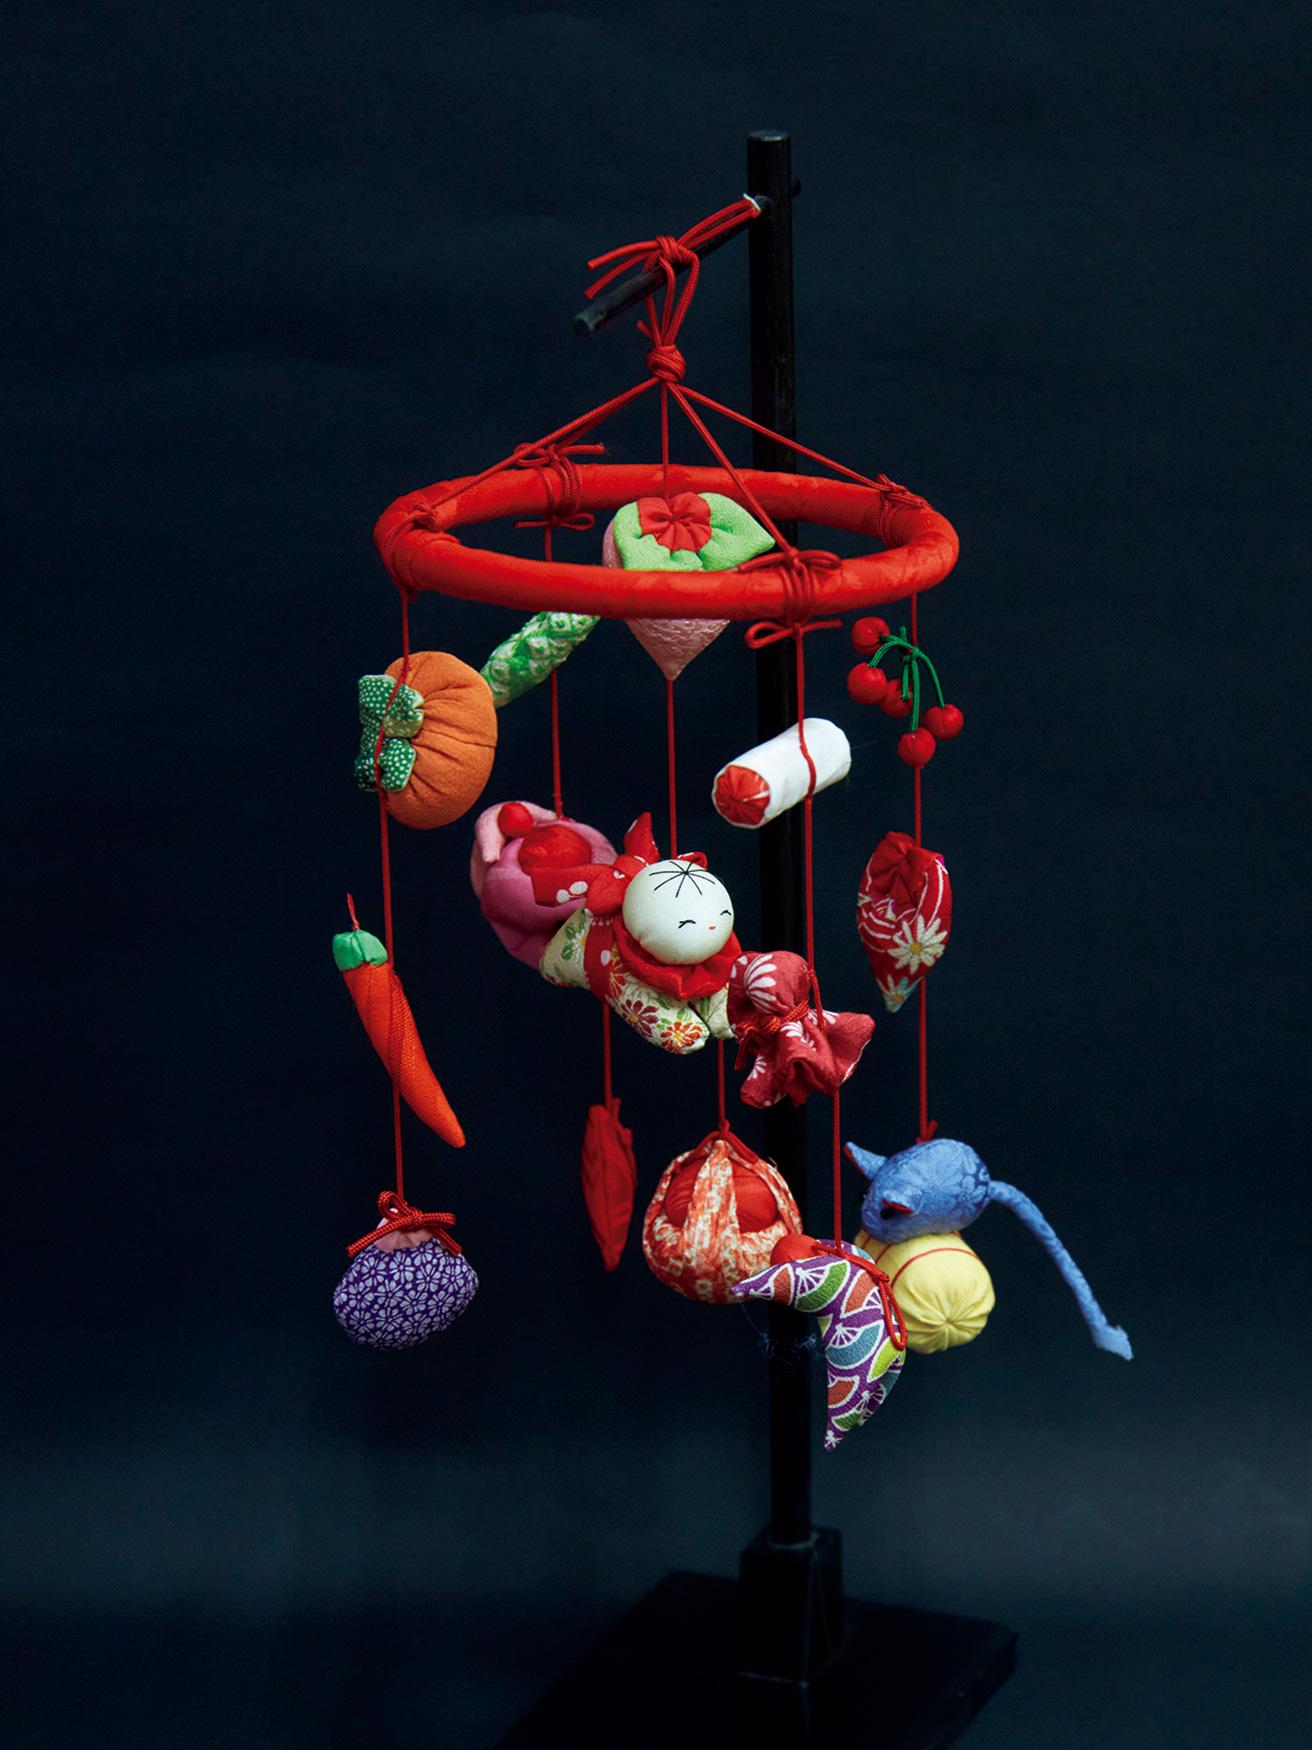 Purchase No. 58【Doll’s Festival Mobiles】Small, handsewn Hinamatsuri decorations — suspended doll figurines summoning the happiness of women young and old.